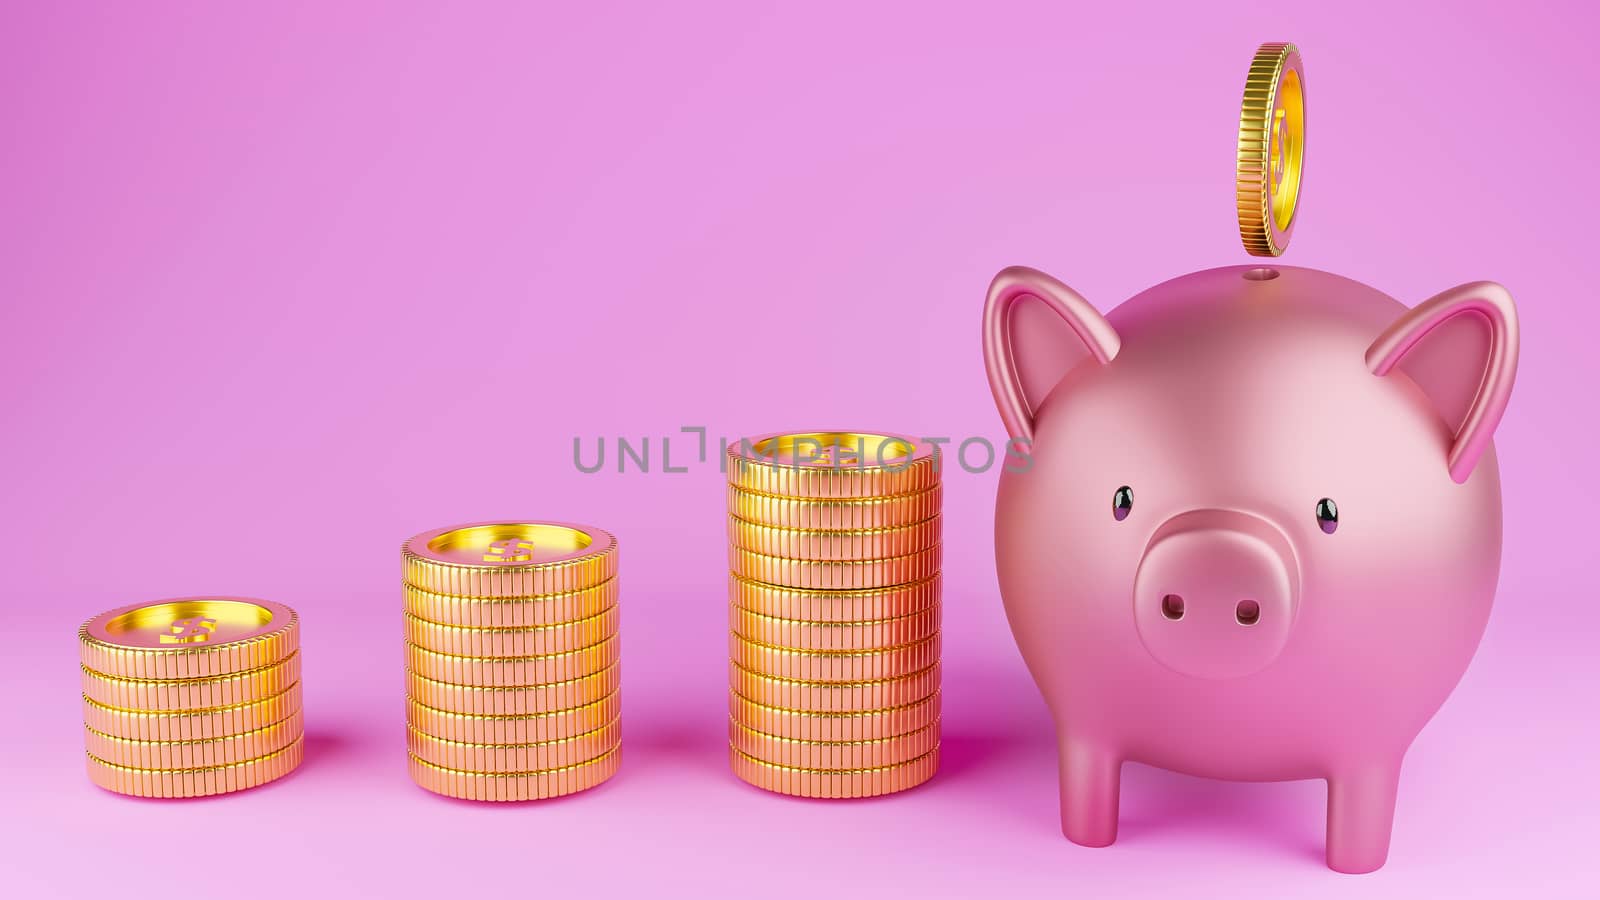 3D rendered image of a metallic pink piggy bank and gold coins on pink background.